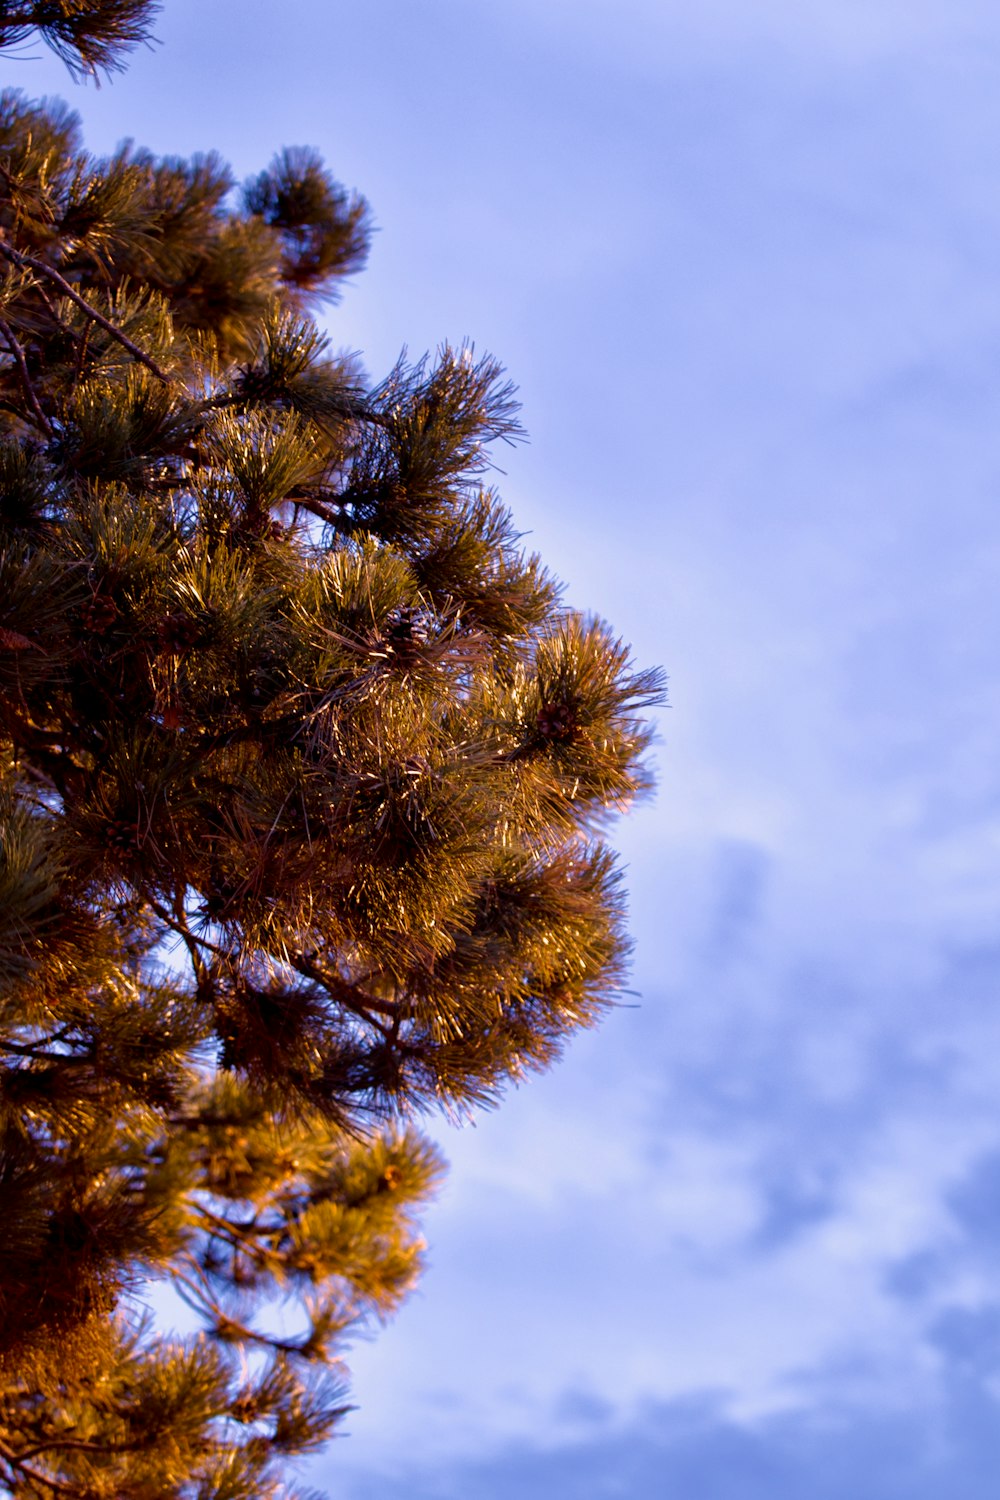 a bird is perched on top of a pine tree